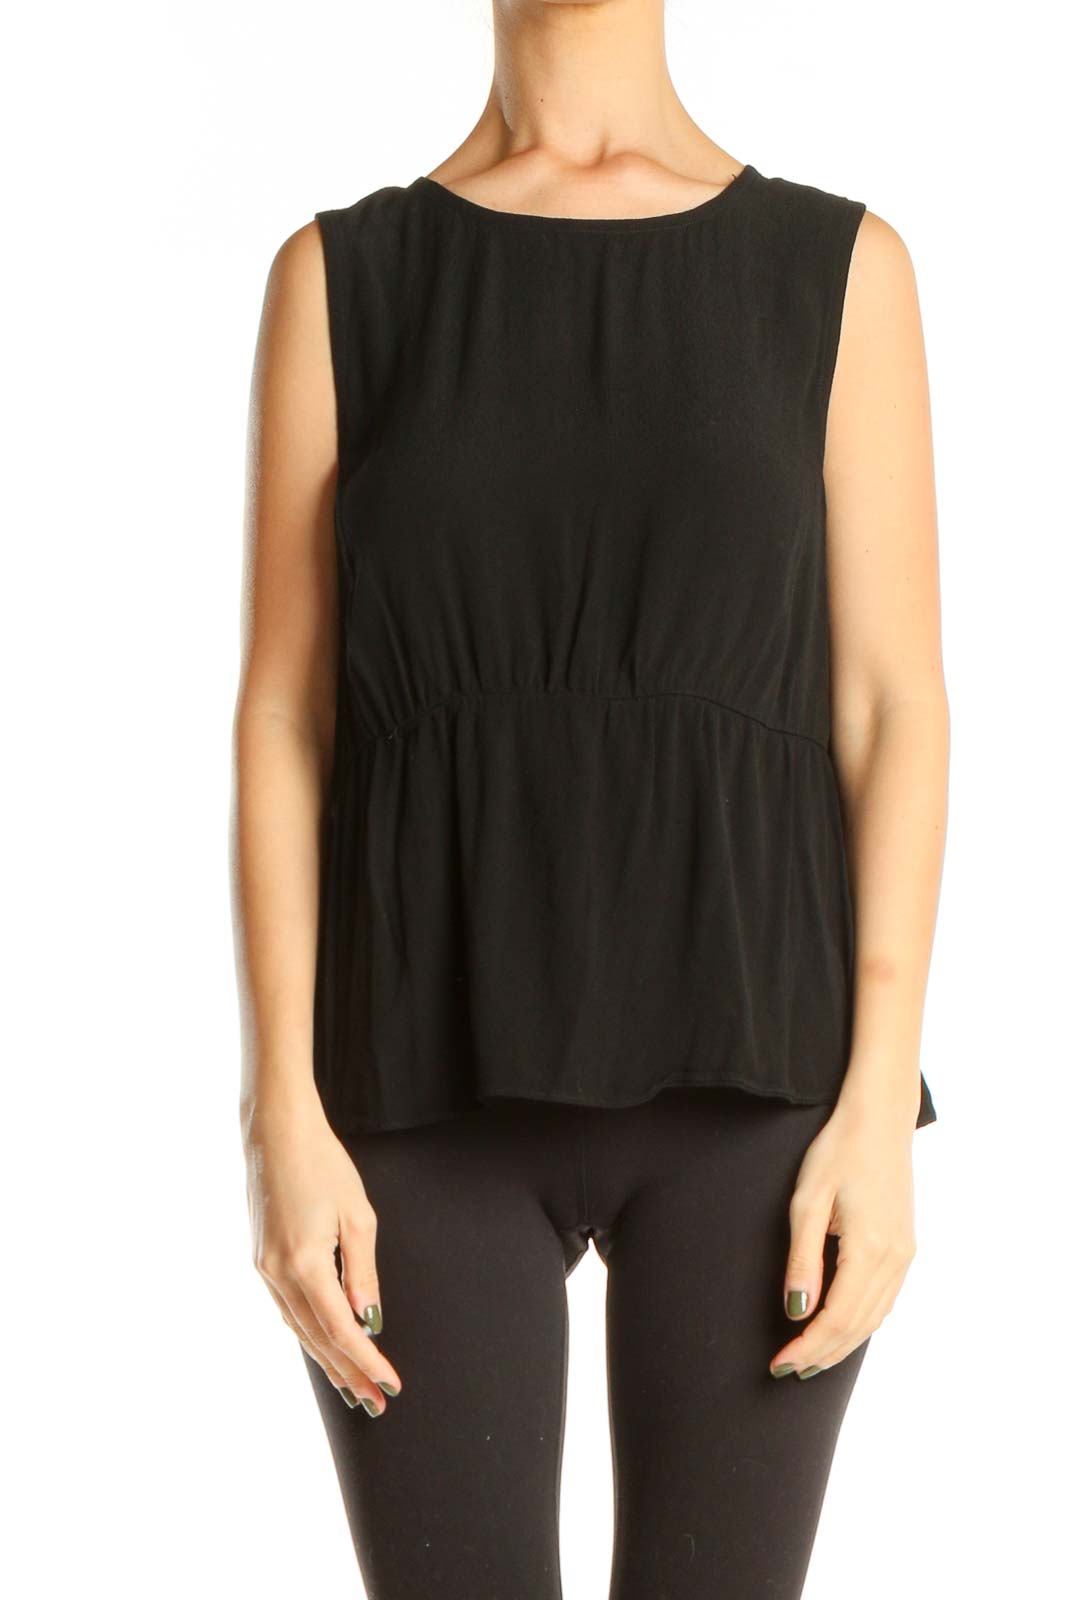 Black Classic Top Front